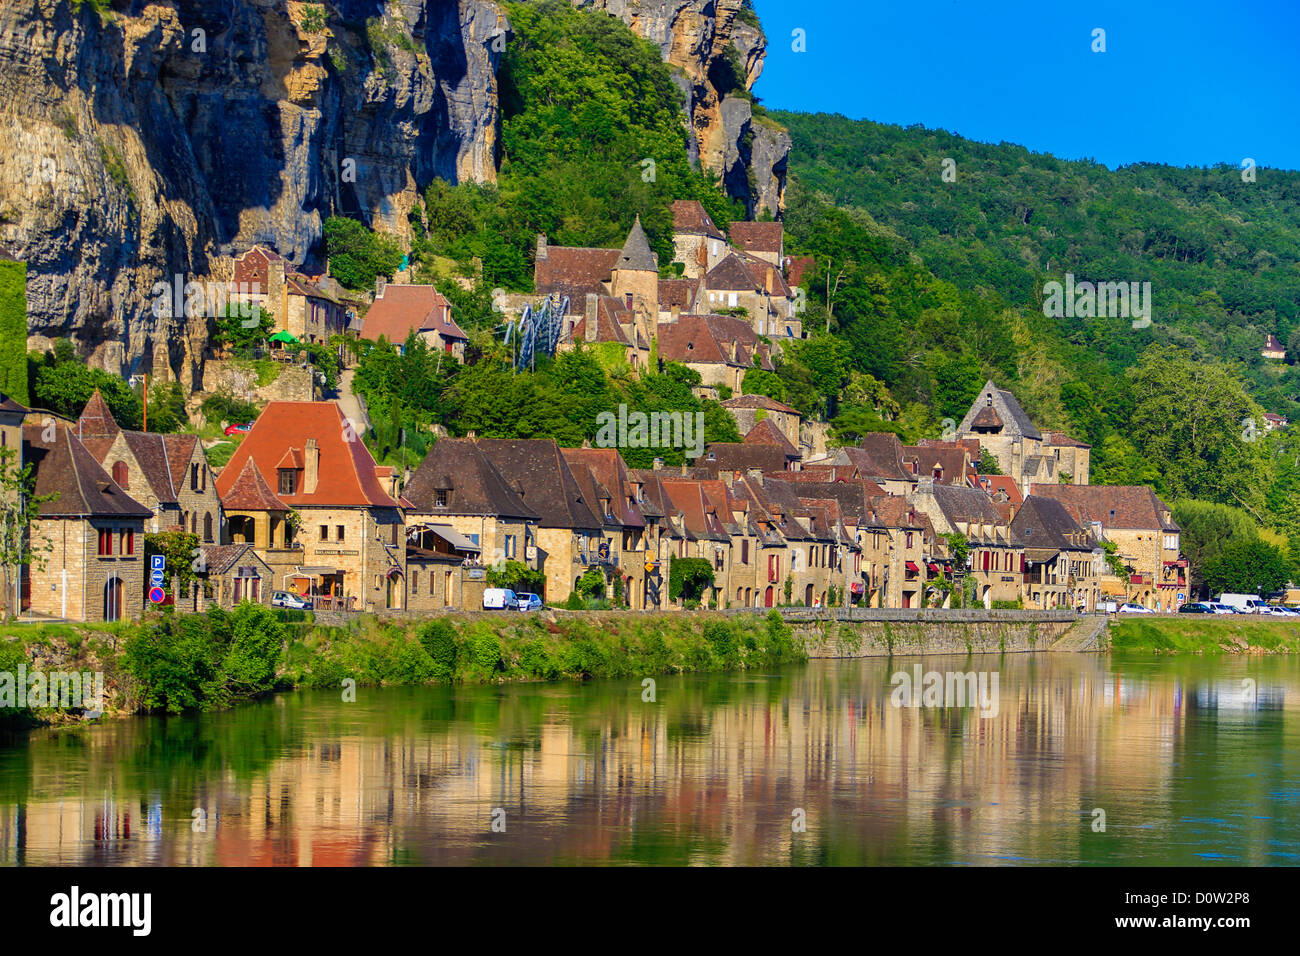 France, Europe, travel, Dordogne, La Roque Gageac, River, architecture, medieval, reflection, traditional, valley, village Stock Photo